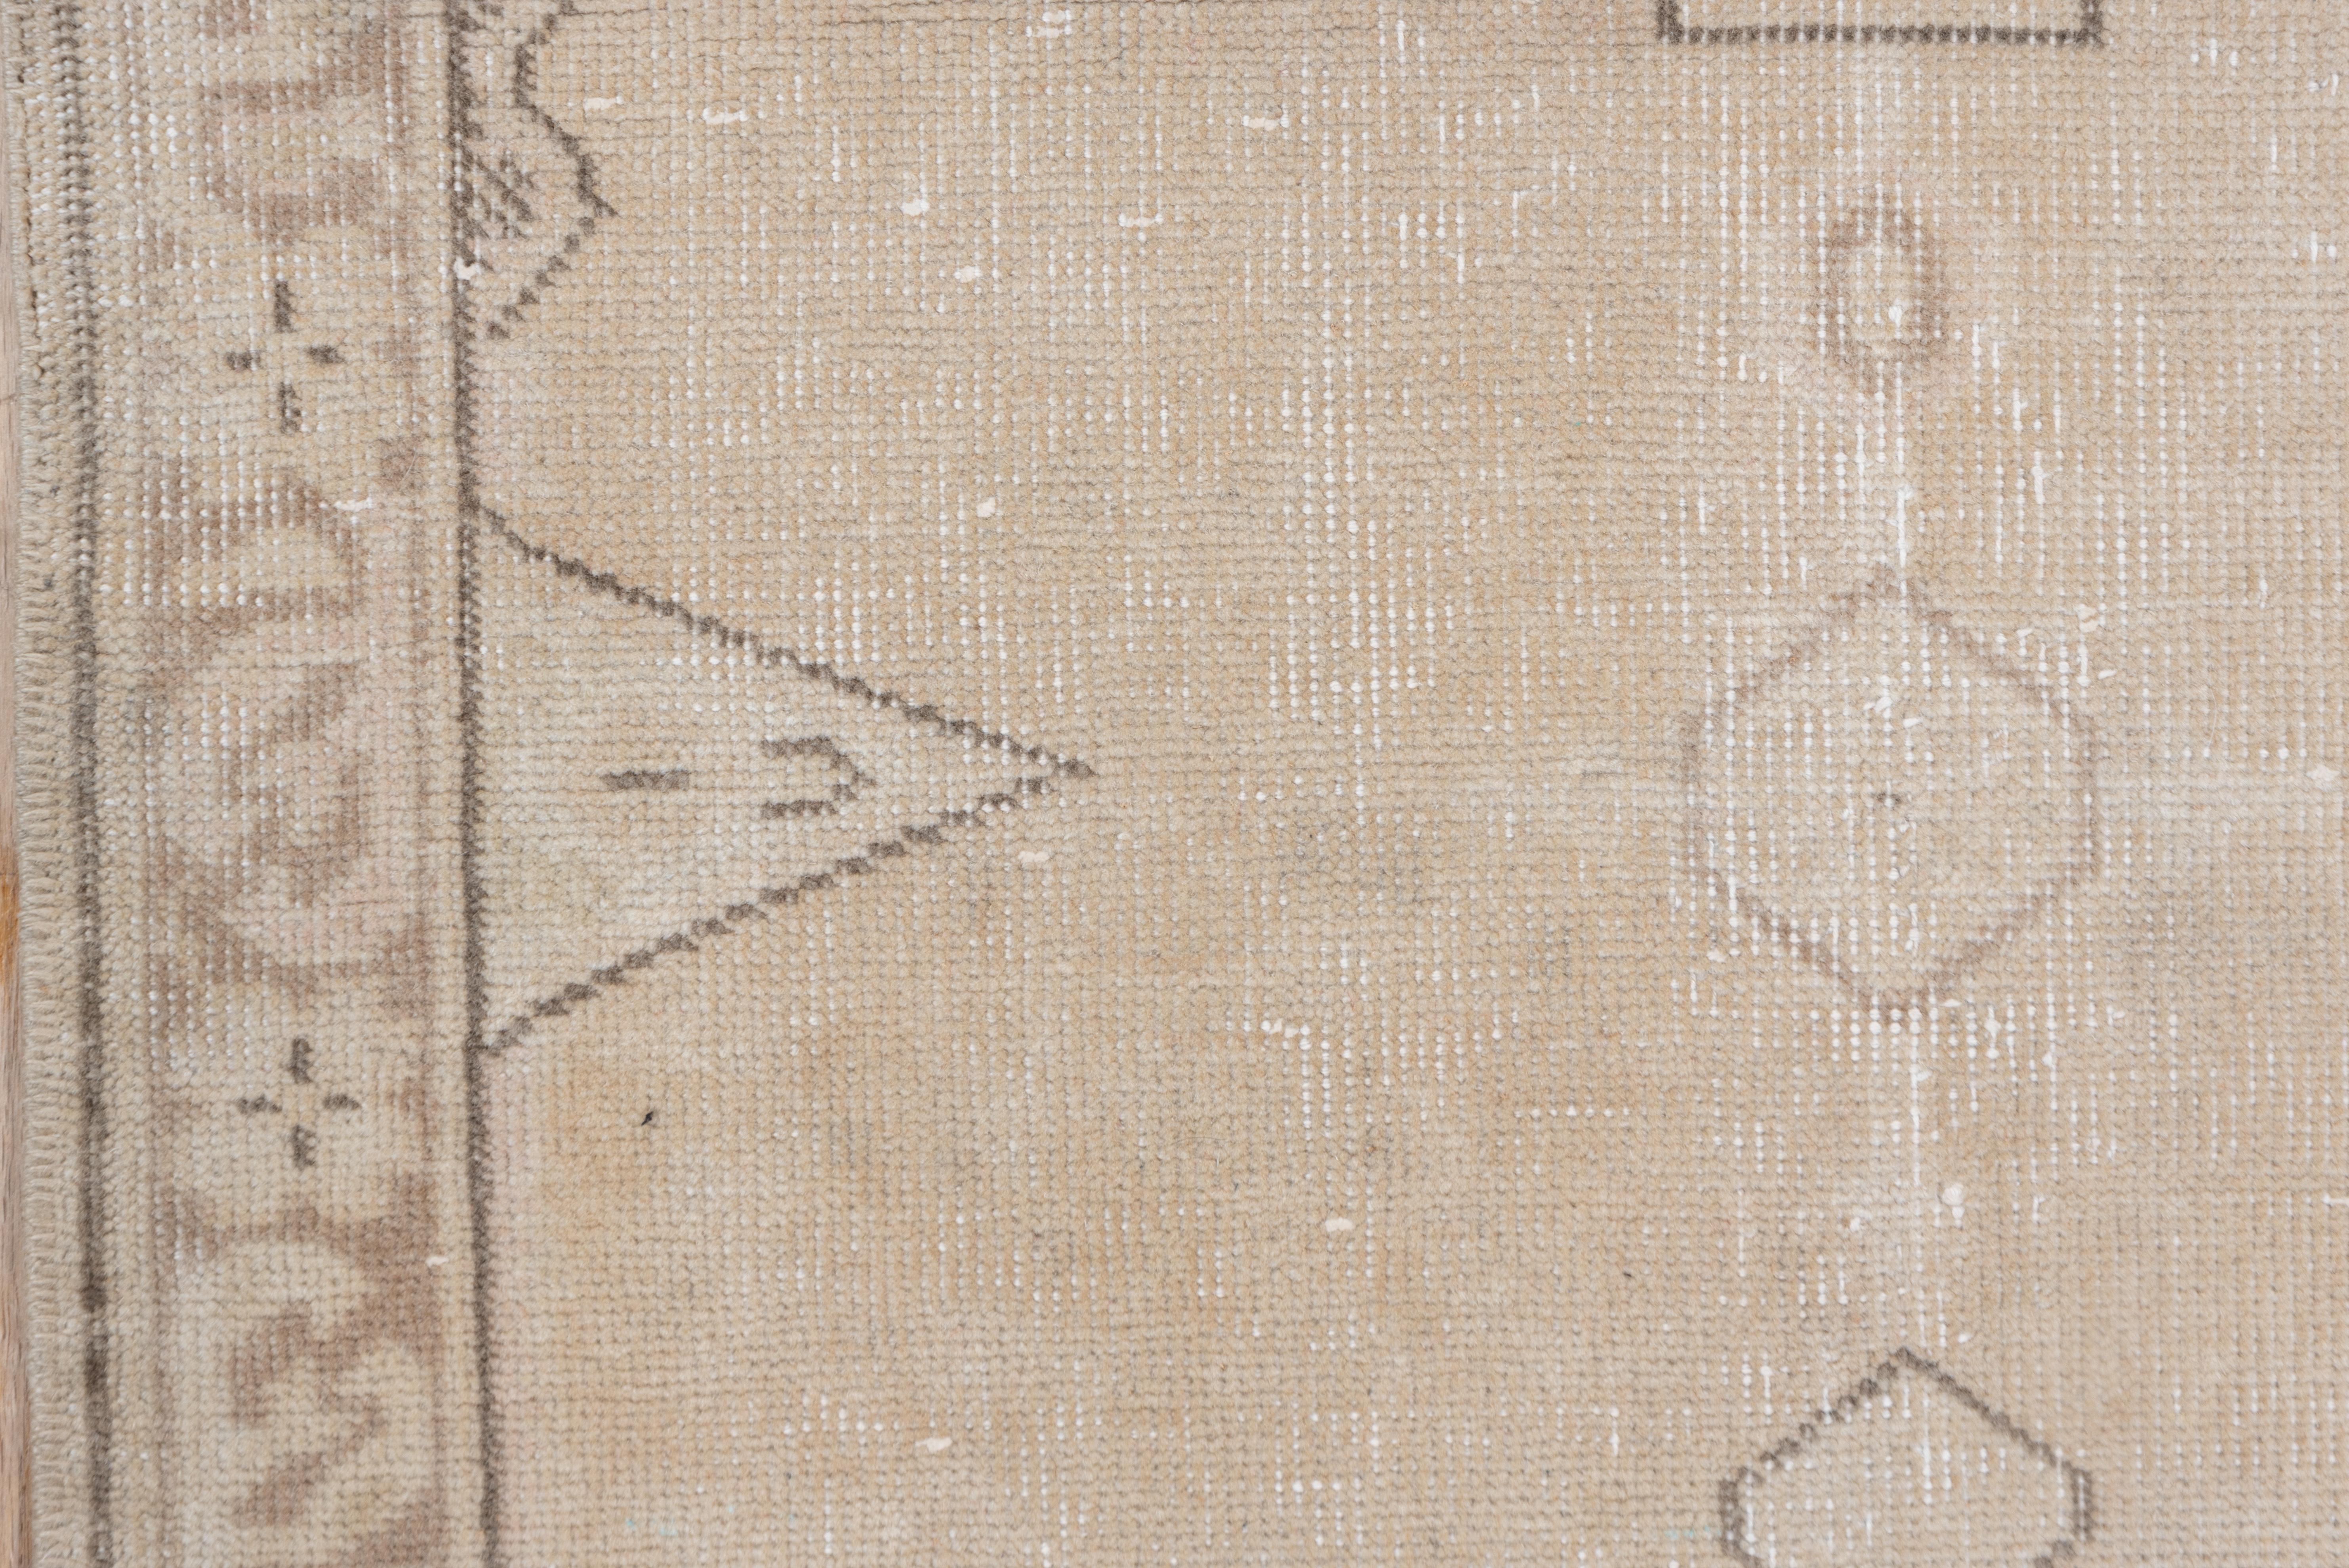 This light colored rustic Anatolian runner shows an open sandy straw to pale buff field centered by a loose pole medallion of cartouches, octagons and a cruciform element. Caucasian style. Taupe rosette border.